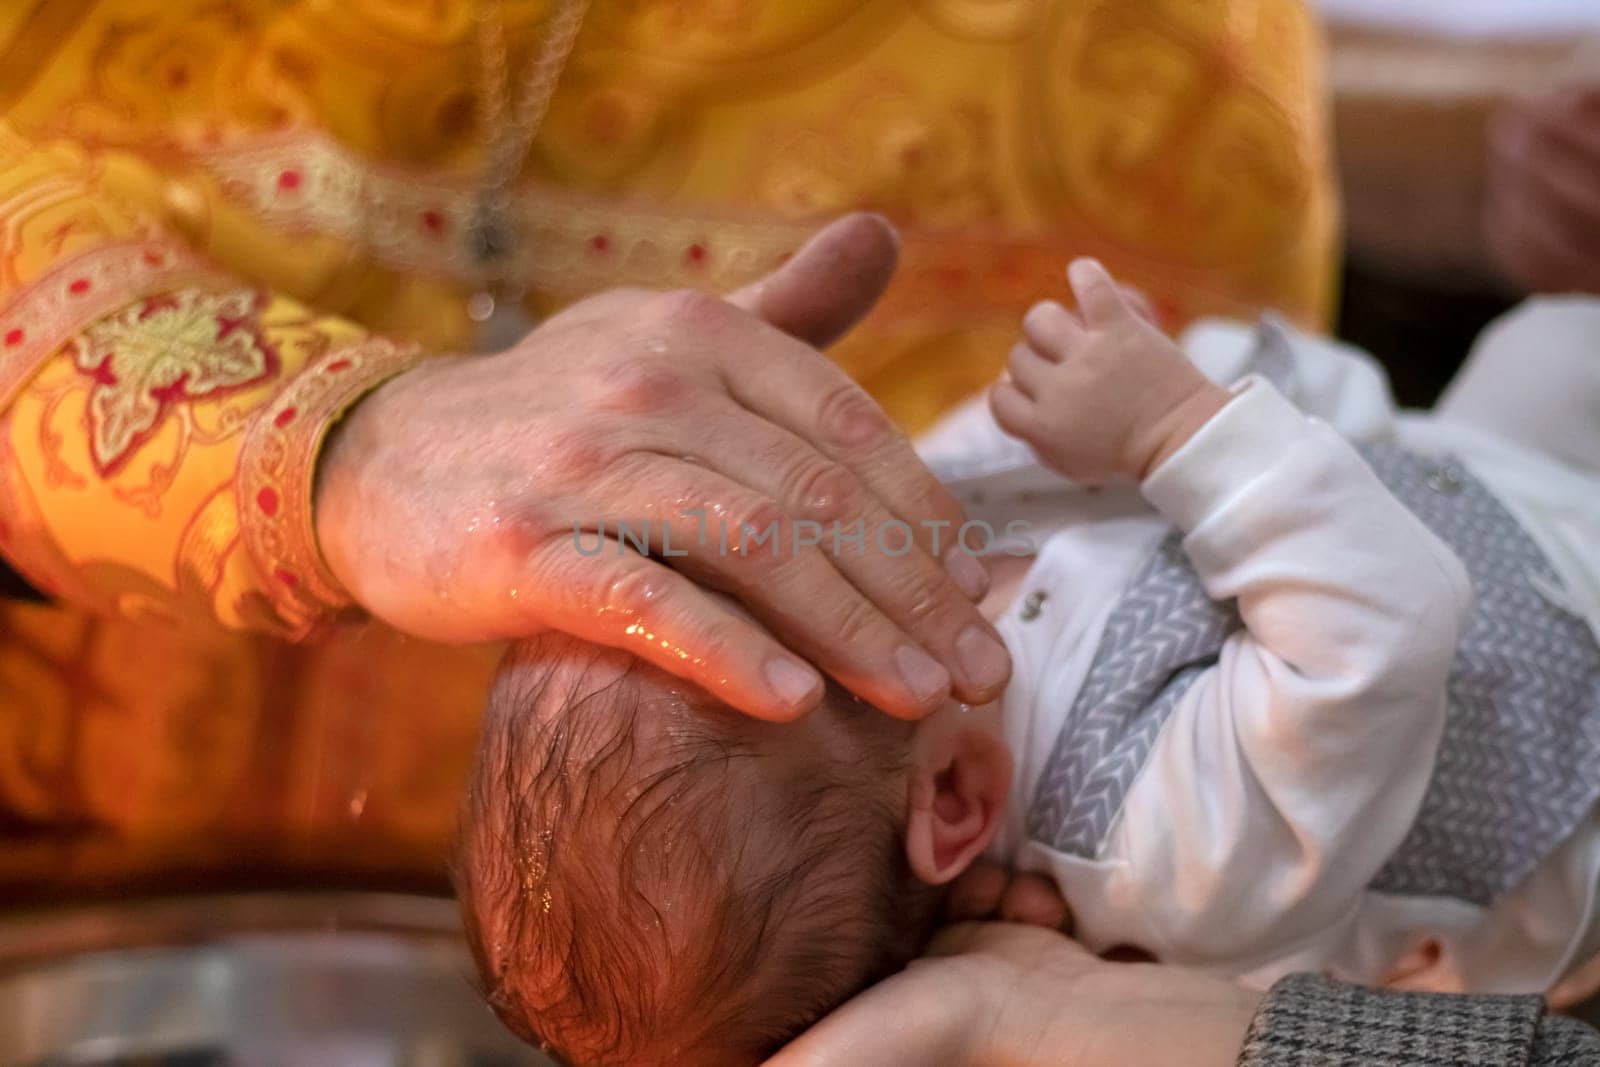 Ukraine, Khmelnitsky 02.10.2022. Infant baptism. Water is poured on the head of an infant. Christening the baby at the Orthodox church. Christian rite. orthodox rite. Christian baptism of a child